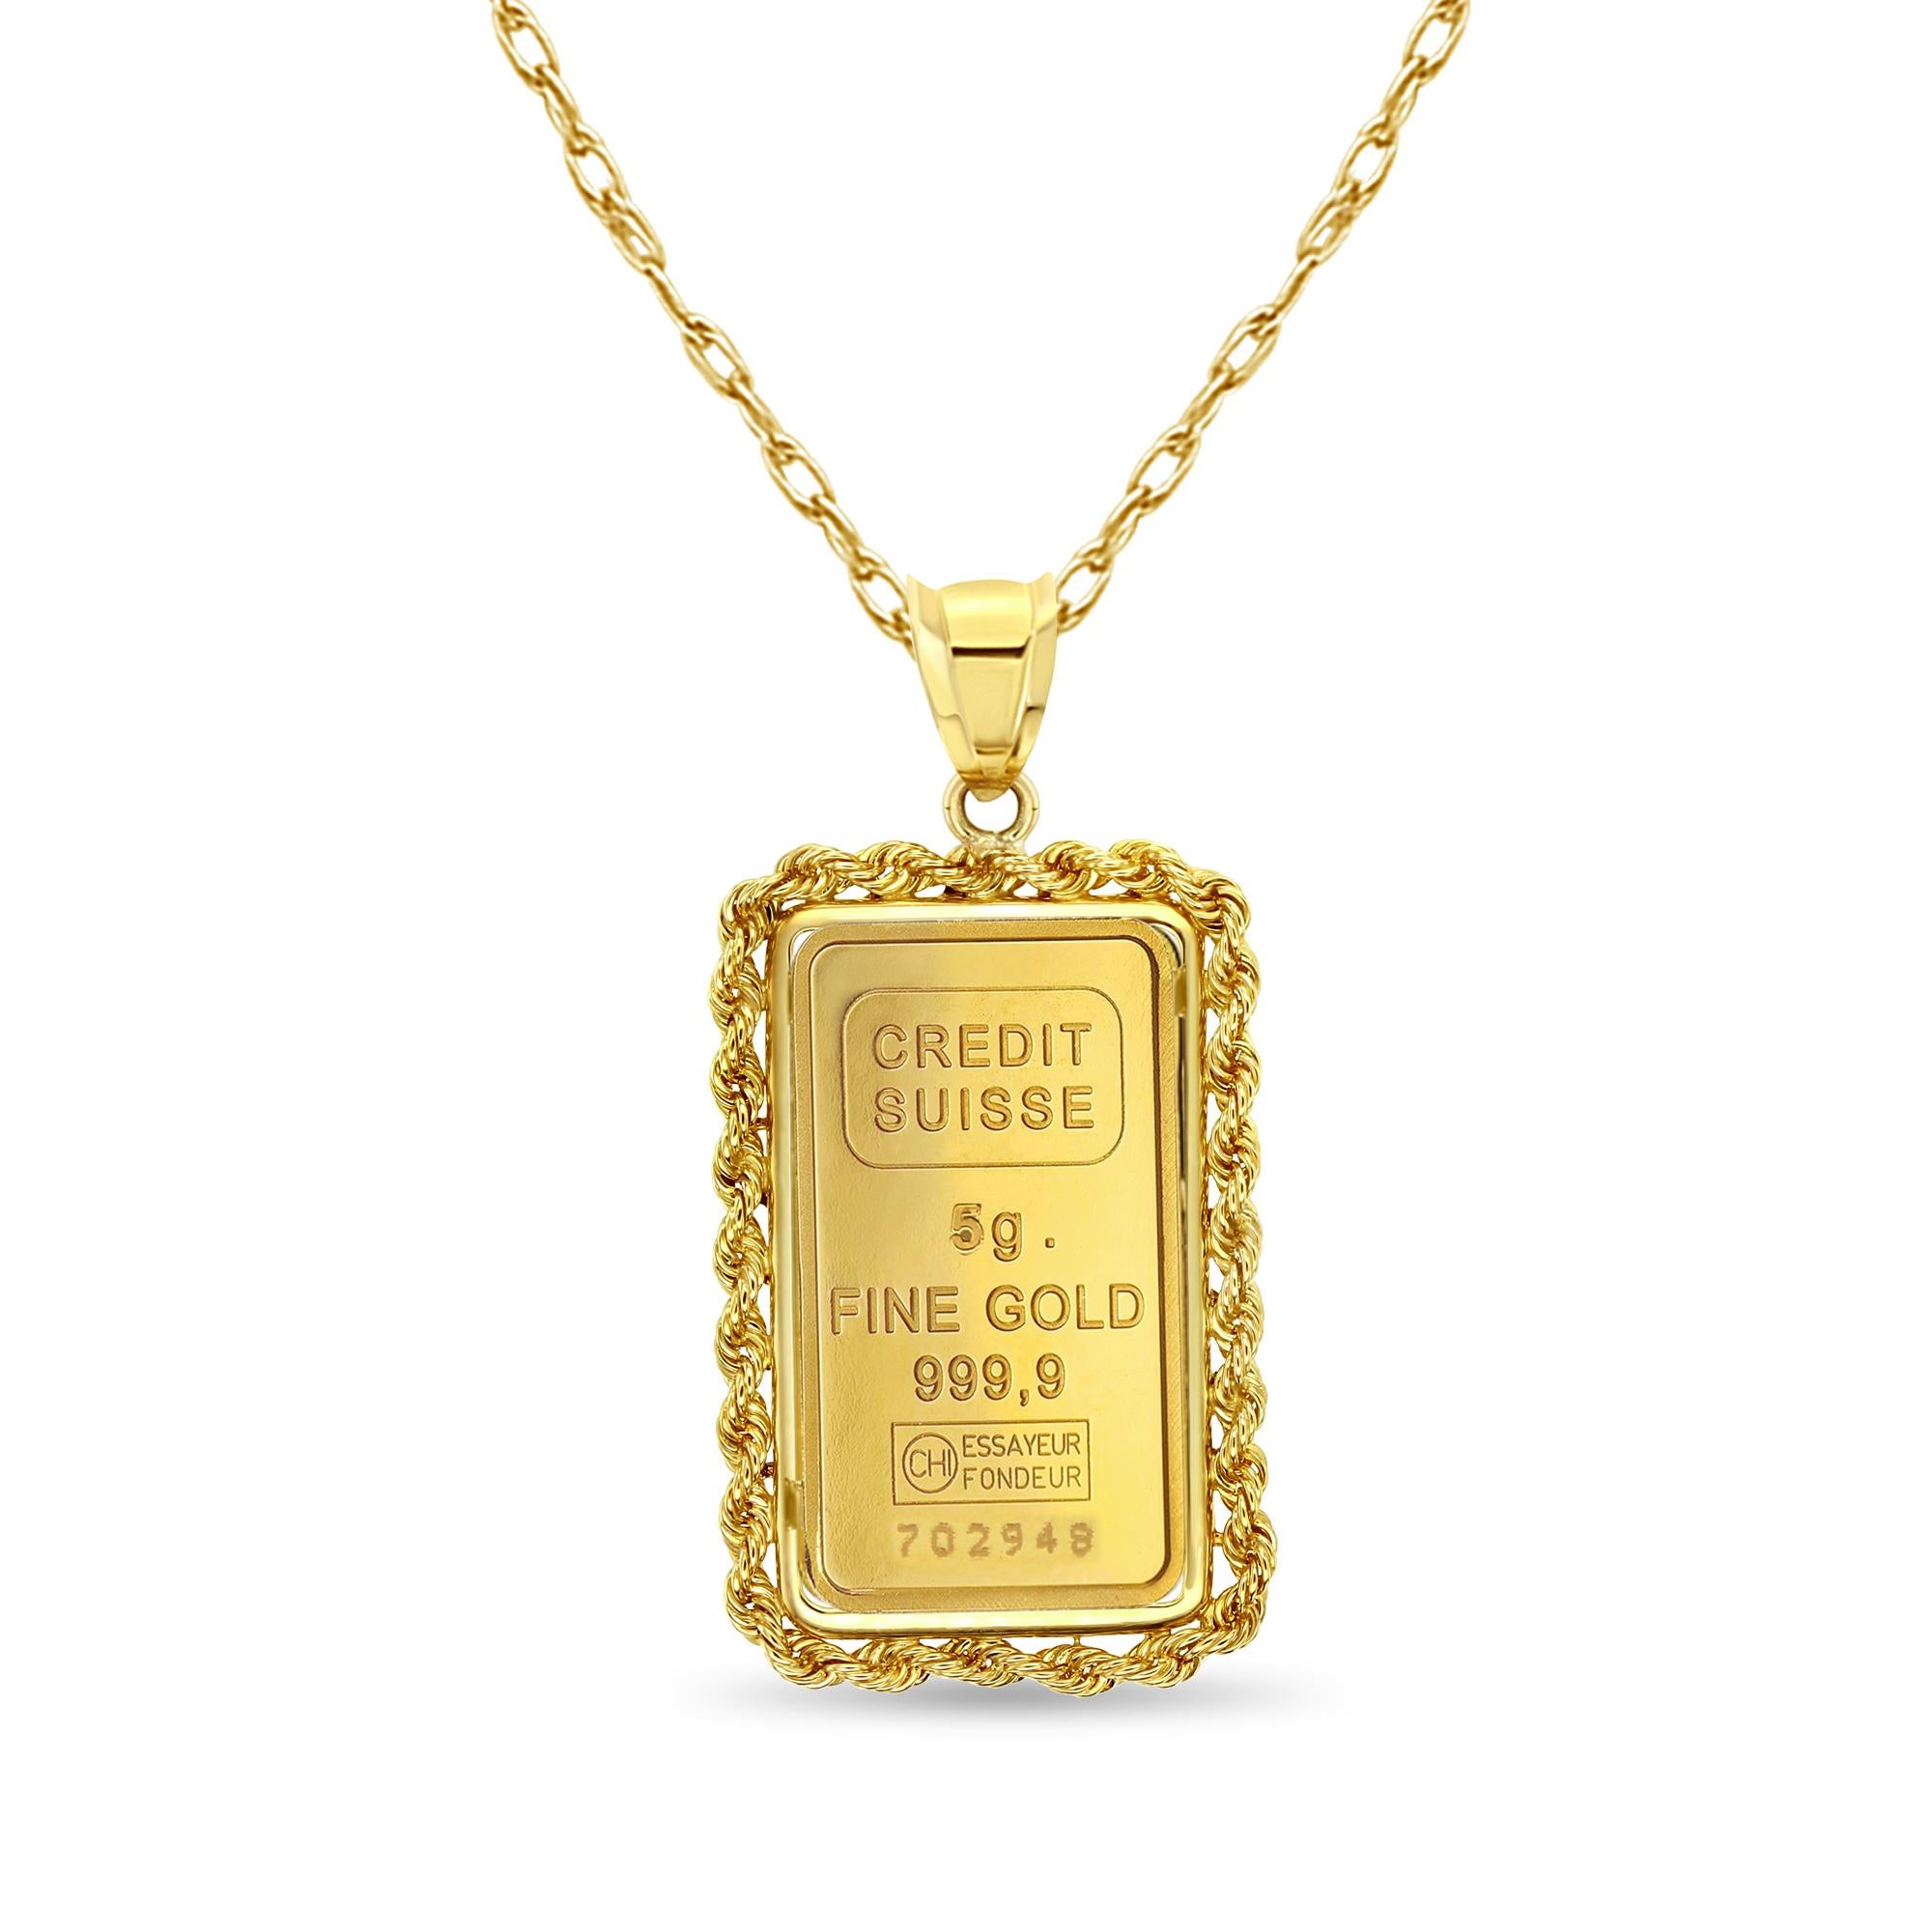 5 Gram Credit Suisse Gold Bar with Rope Bezel Necklace In New Condition For Sale In Sugar Land, TX